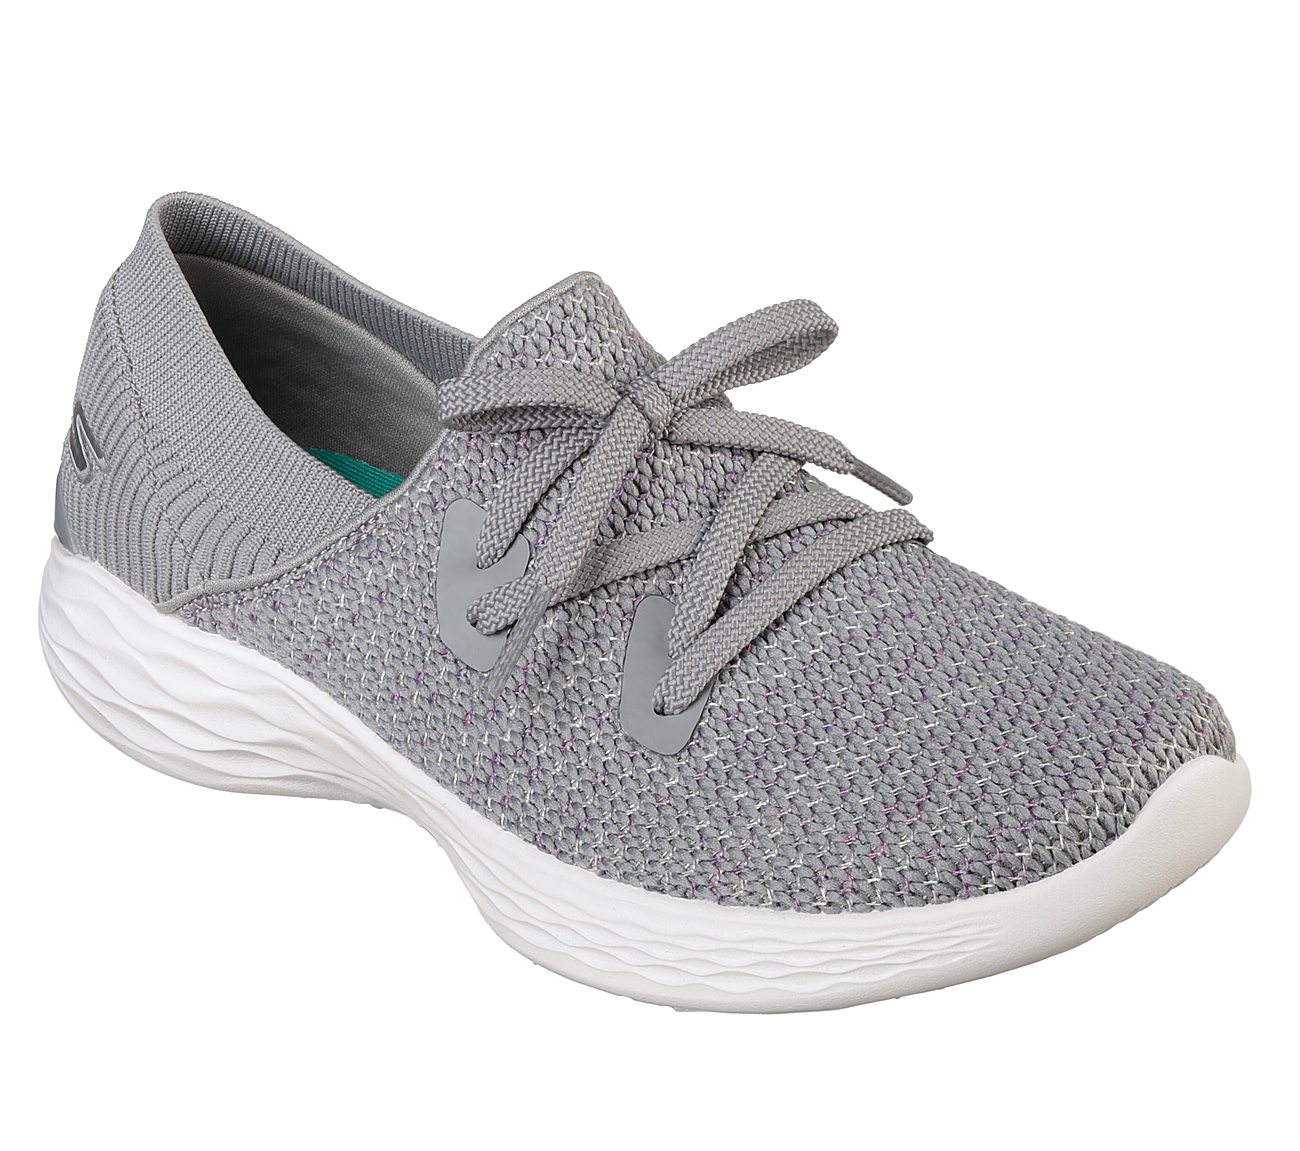 Prominence Skechers Performance Shoes